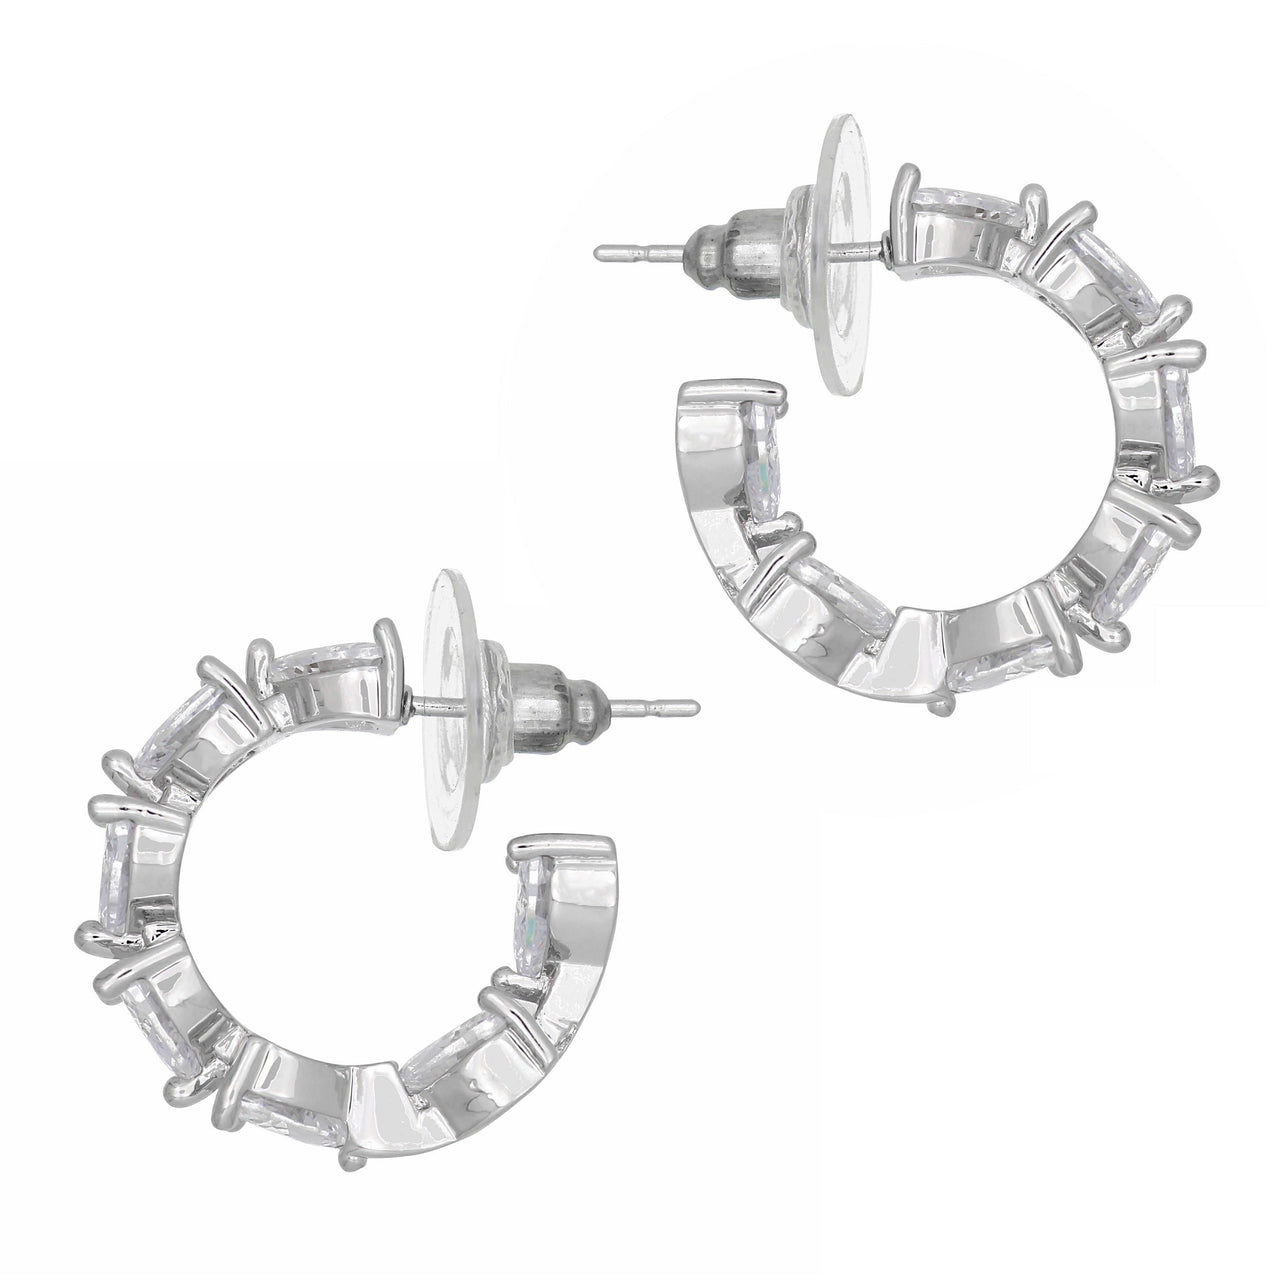 Heartly All Around White Hoops Earrings Rhodium Plated 18mm